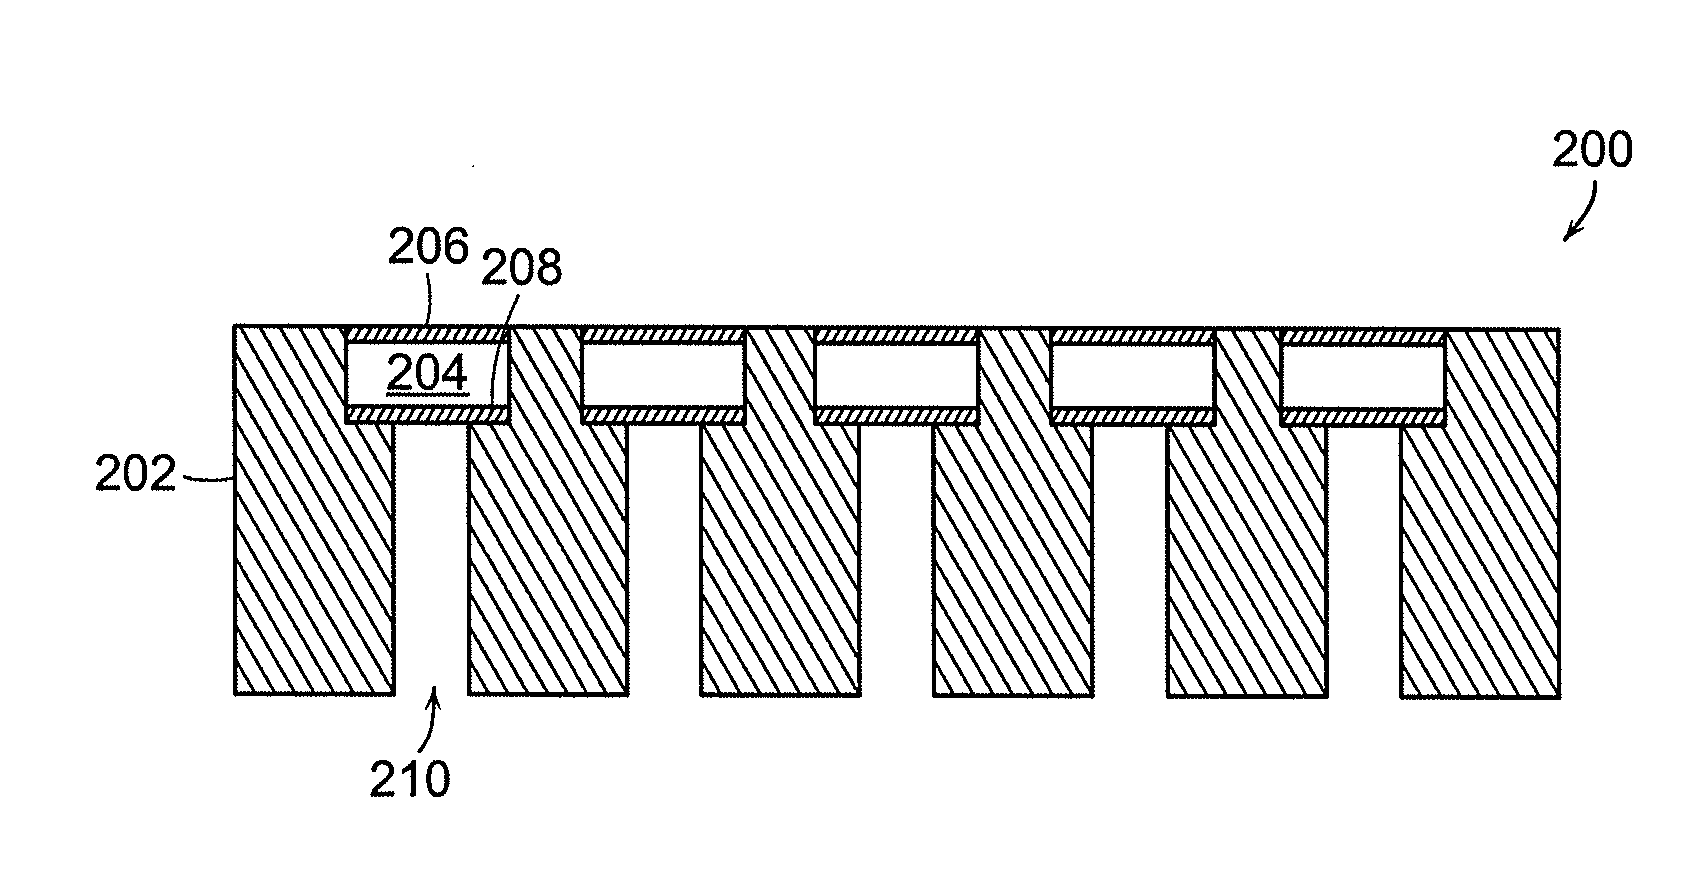 Substrates having through-hole vias and method of making same